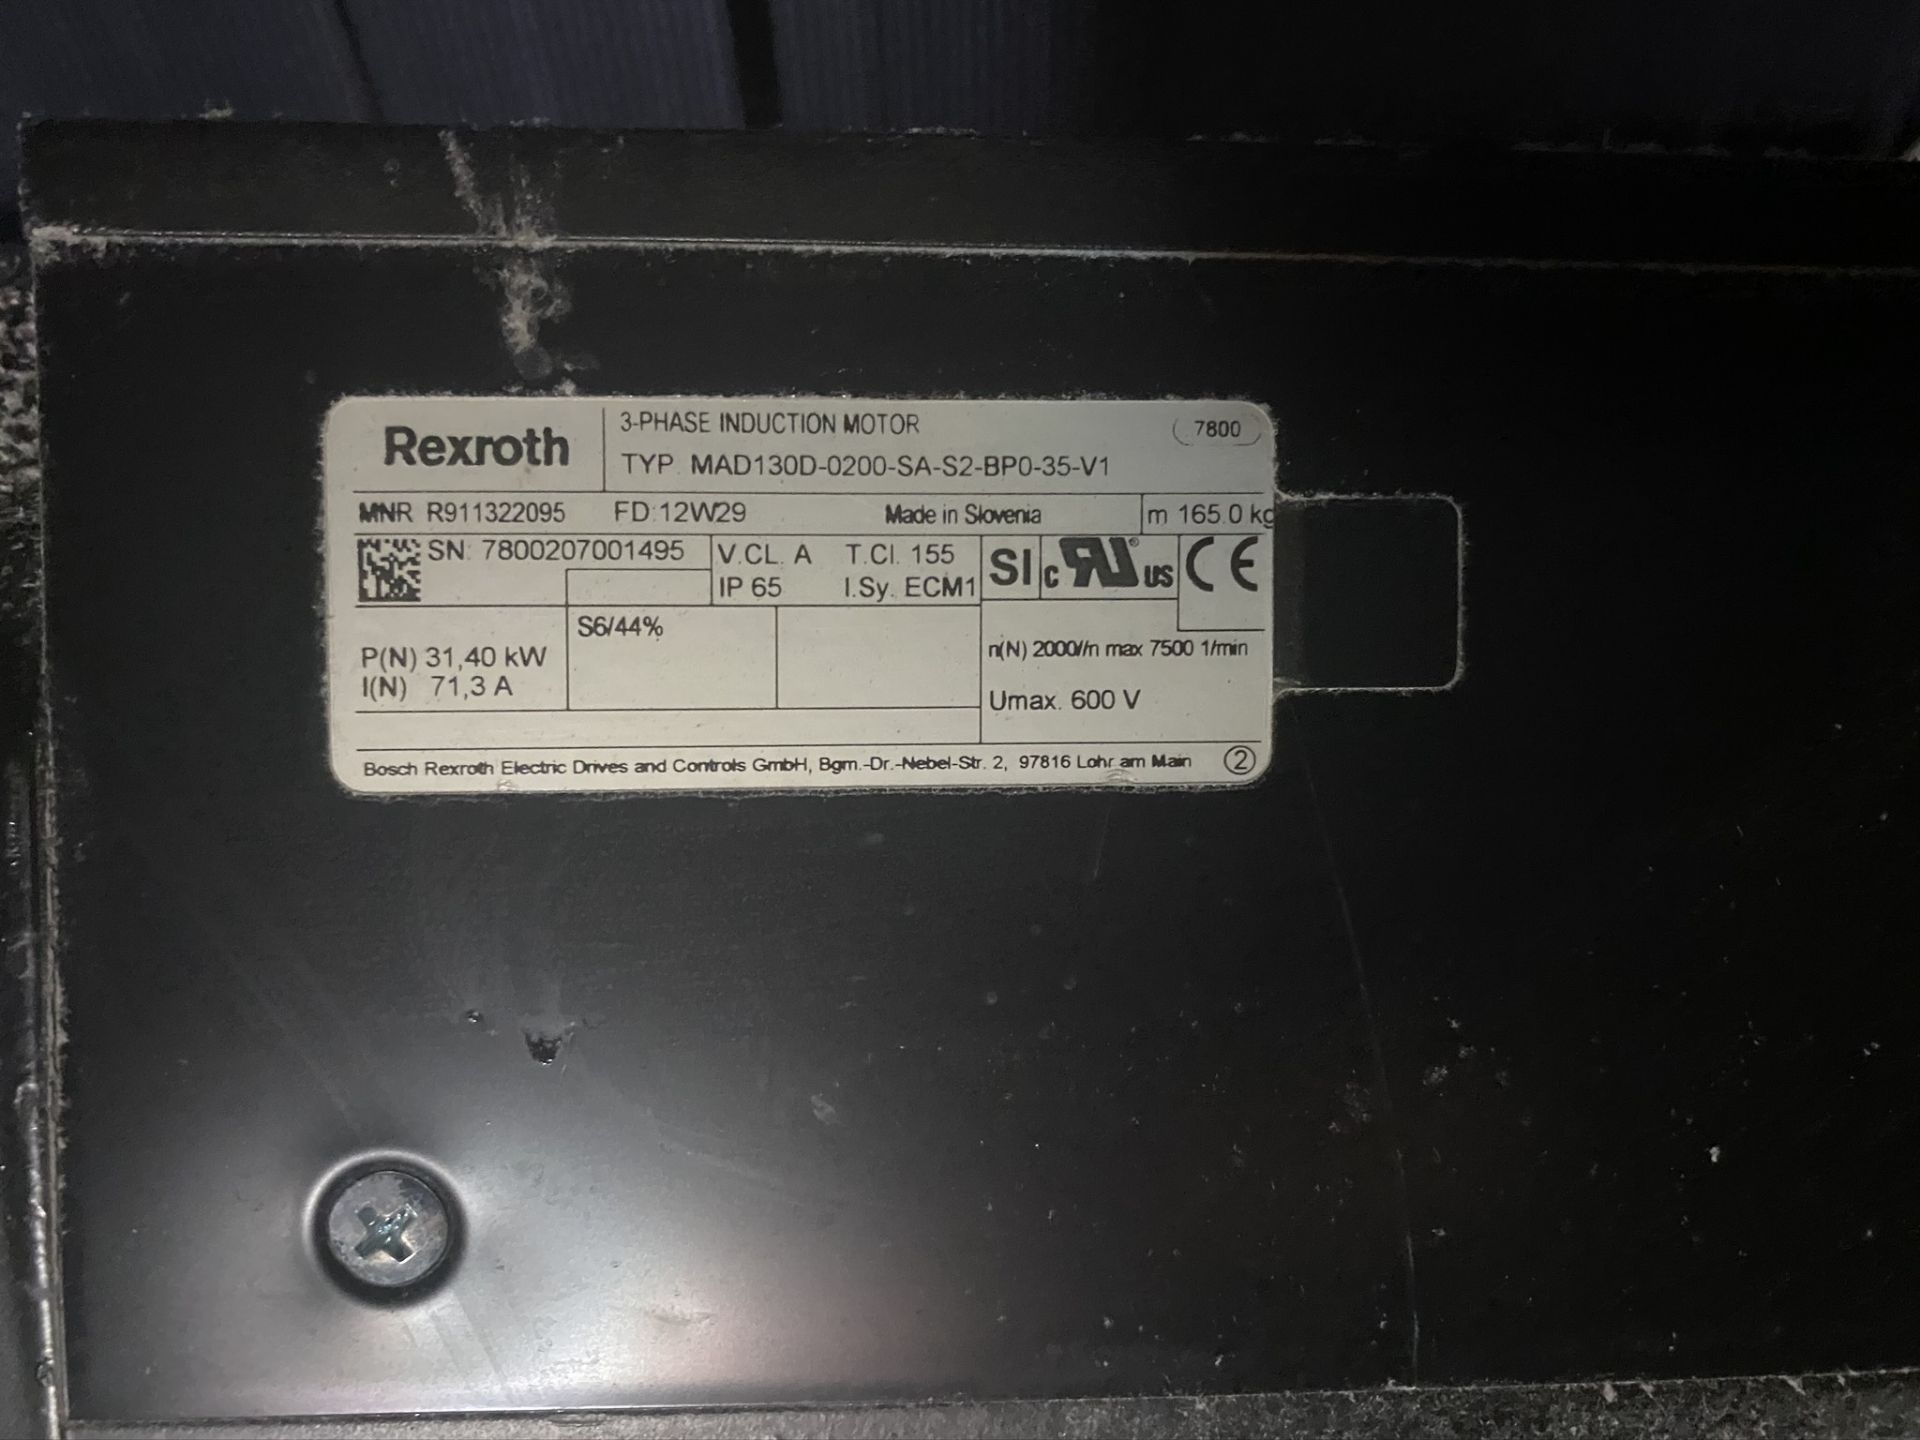 Rexroth motor. 3-Phase induction motor. Typ: MAD130D-0200-SA-S2-BP0-35-V1. S/N 7800207001495. (S. - Image 2 of 2